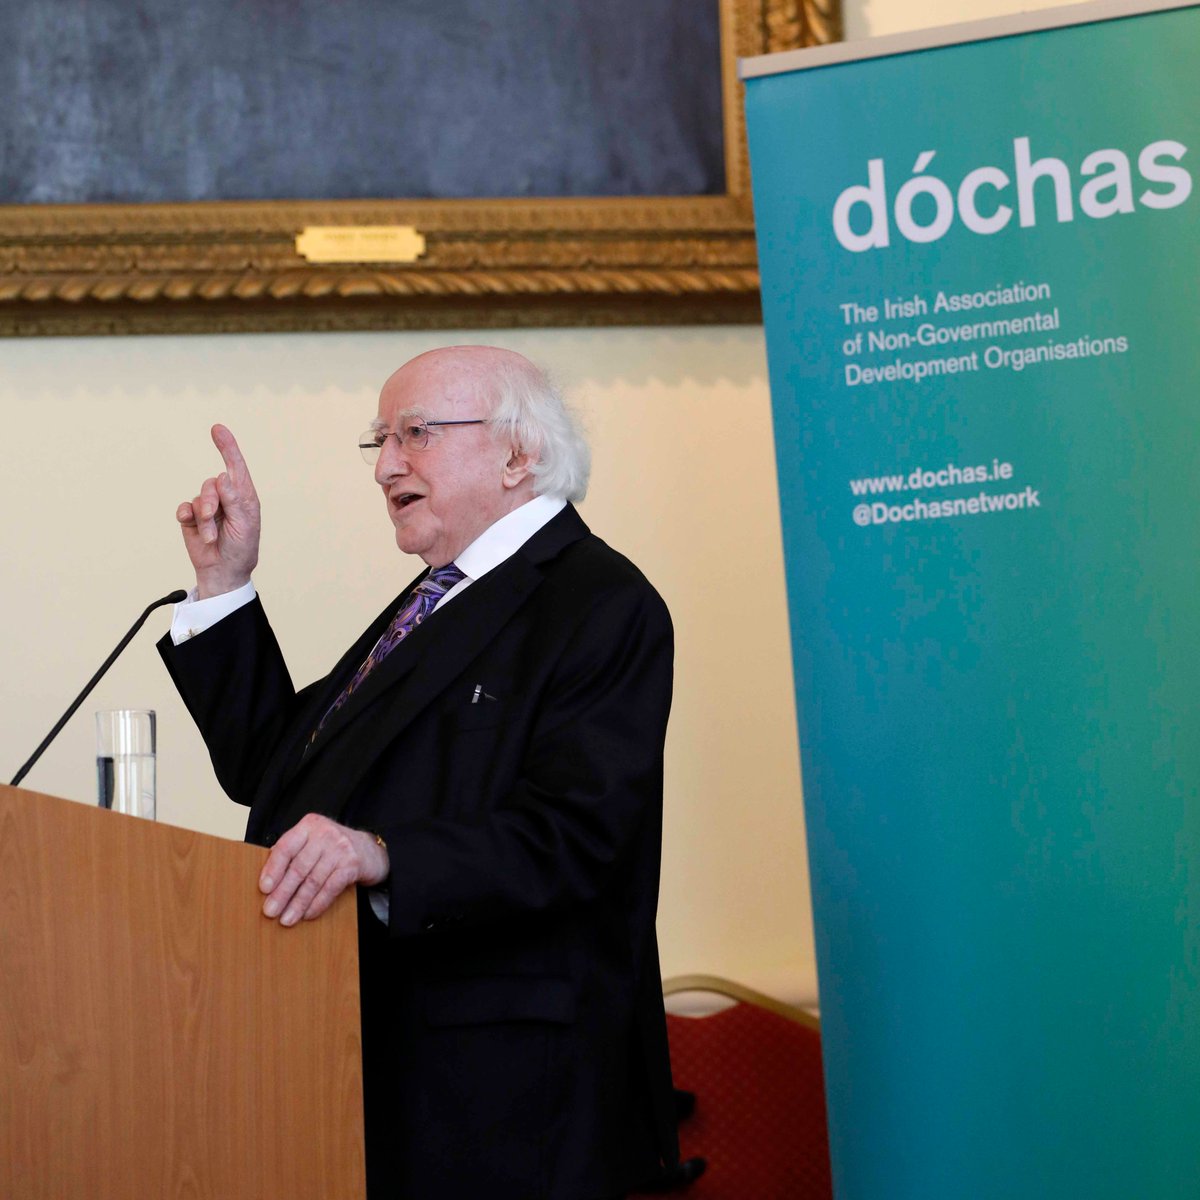 President Higgins this afternoon delivered the keynote address at the @Dochasnetwork conference, 'Dóchas at 50: Sustainable Development in a Time of Climate Crisis', at the Royal College of Physicians in Dublin. You can read the President's speech at president.ie/en/media-libra…